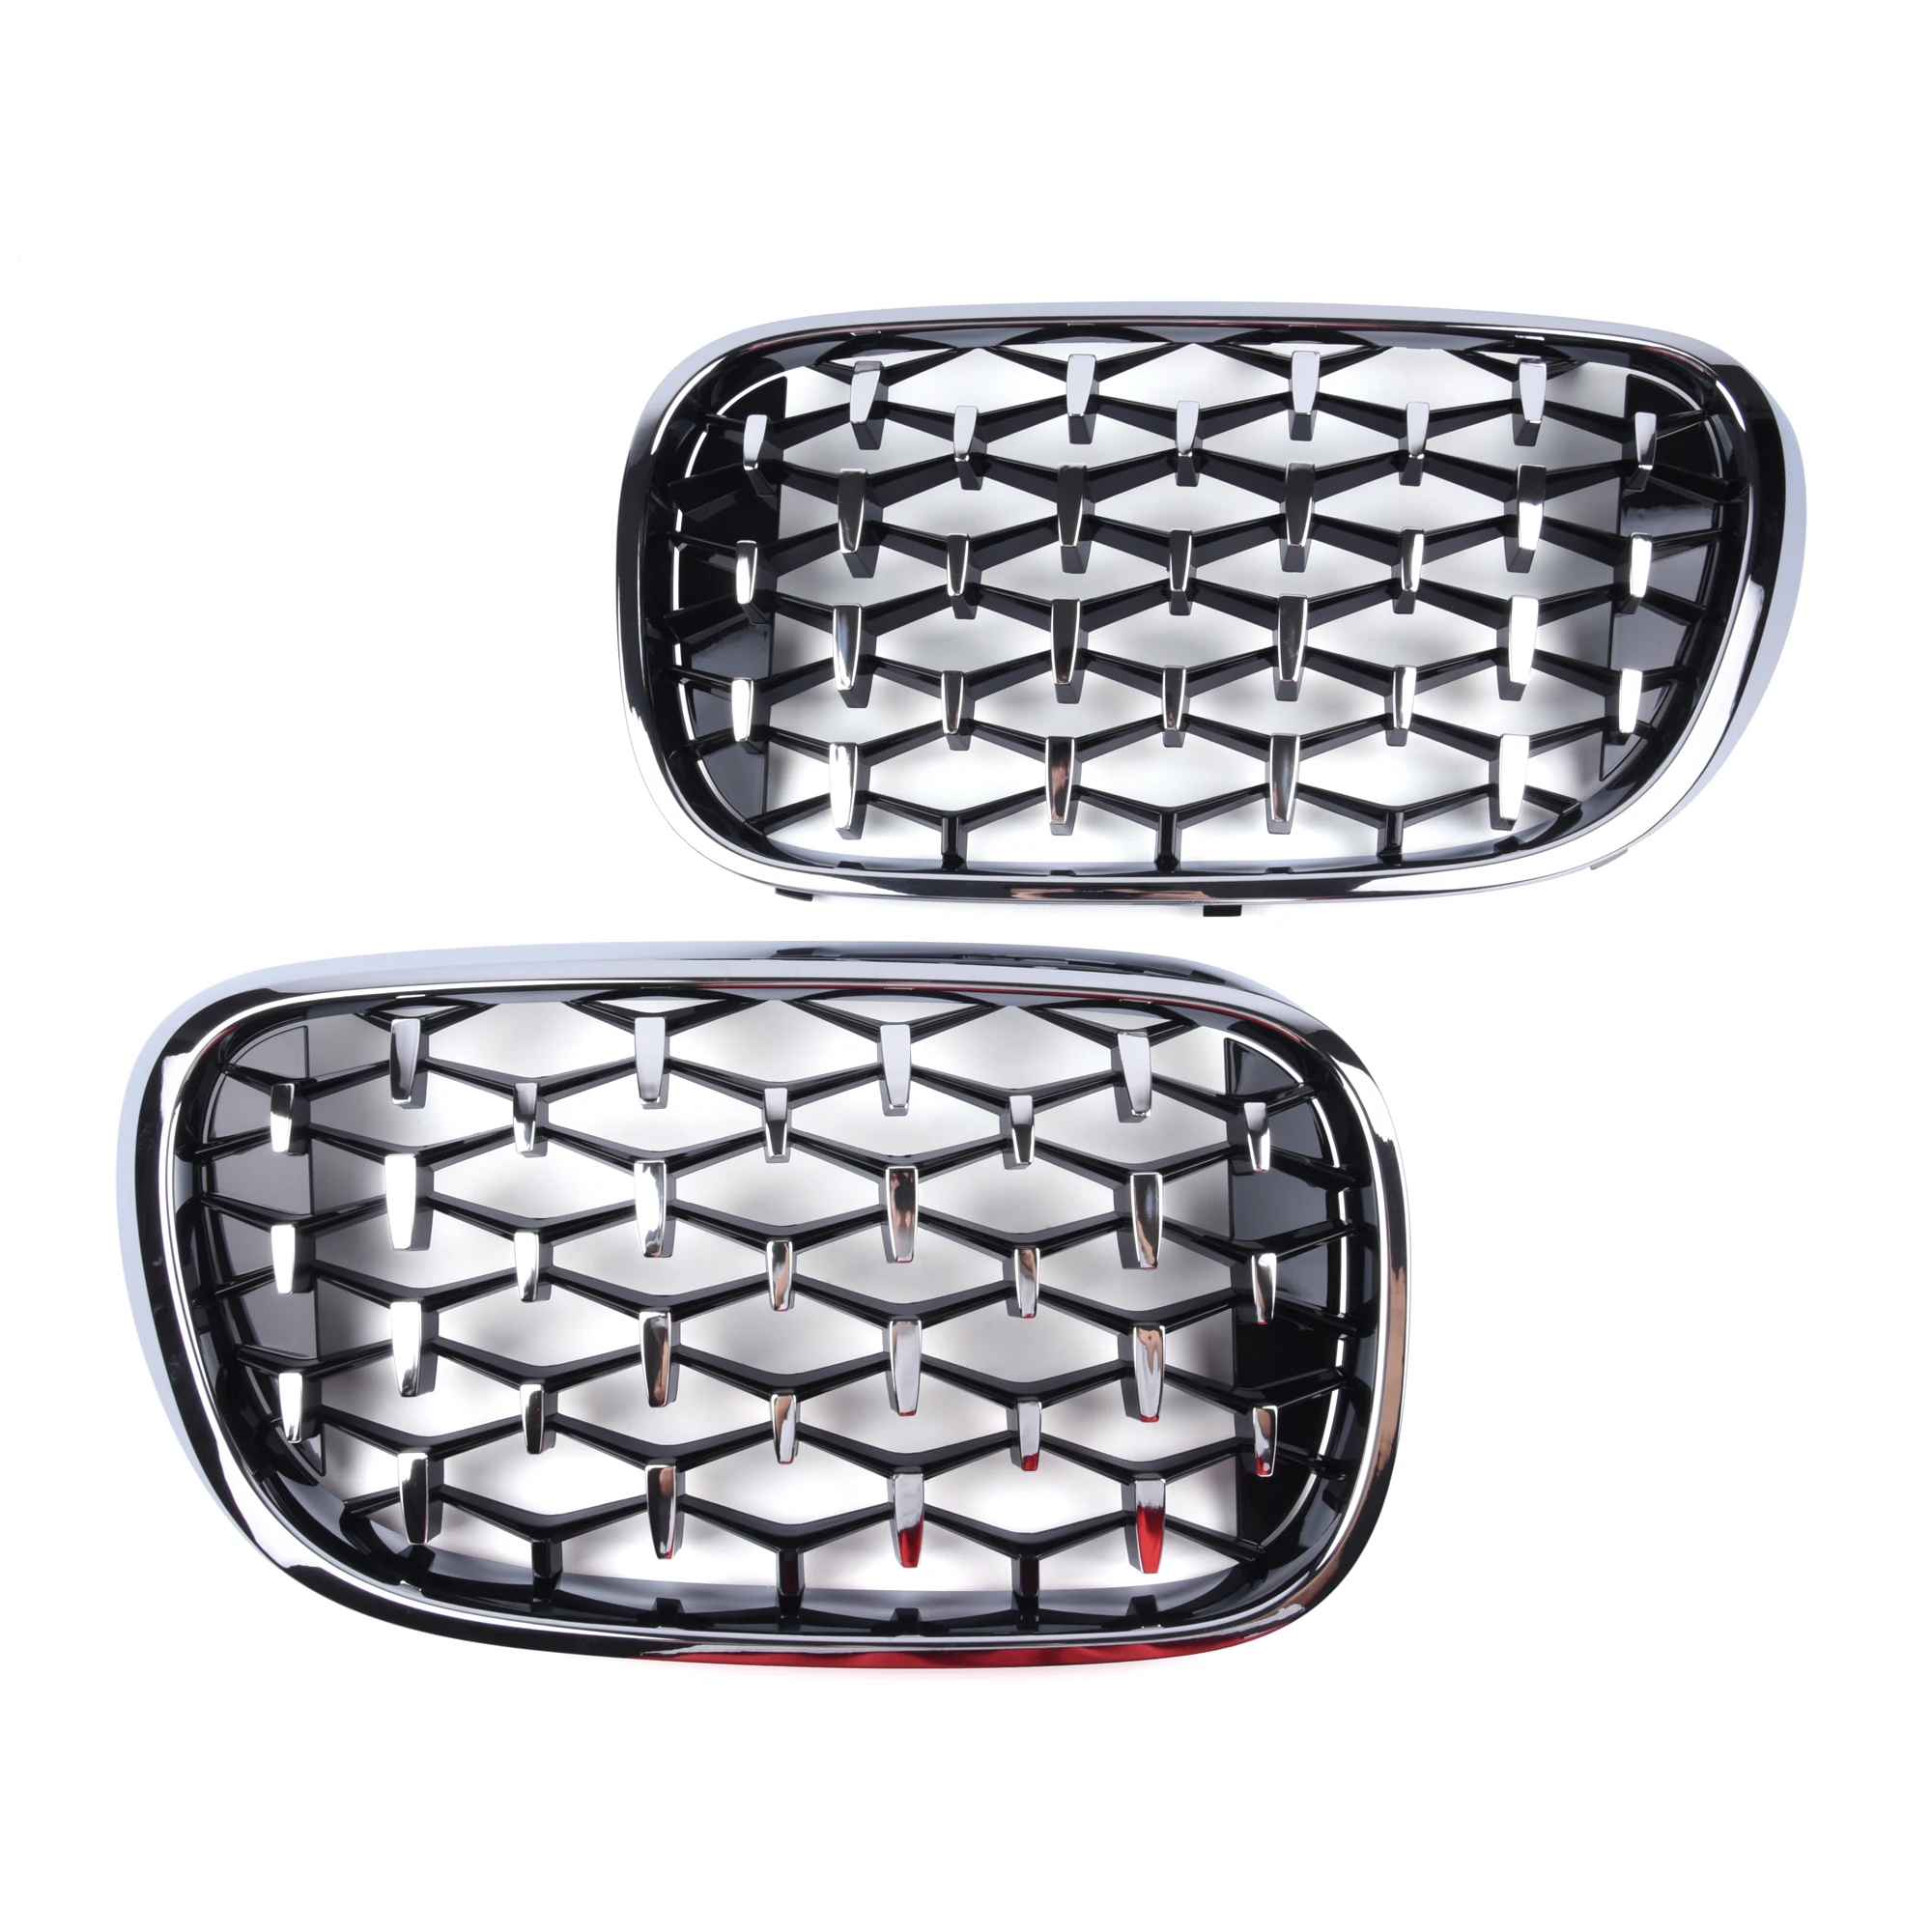 Chrome Diamond Front Kidney Grill Gloss Black Fit BMW 7 Series G11 G12 2015-2019 730Li/d/Ld 740Li/i/e/Le/Ld 750i/Li/d/Ld images - 6